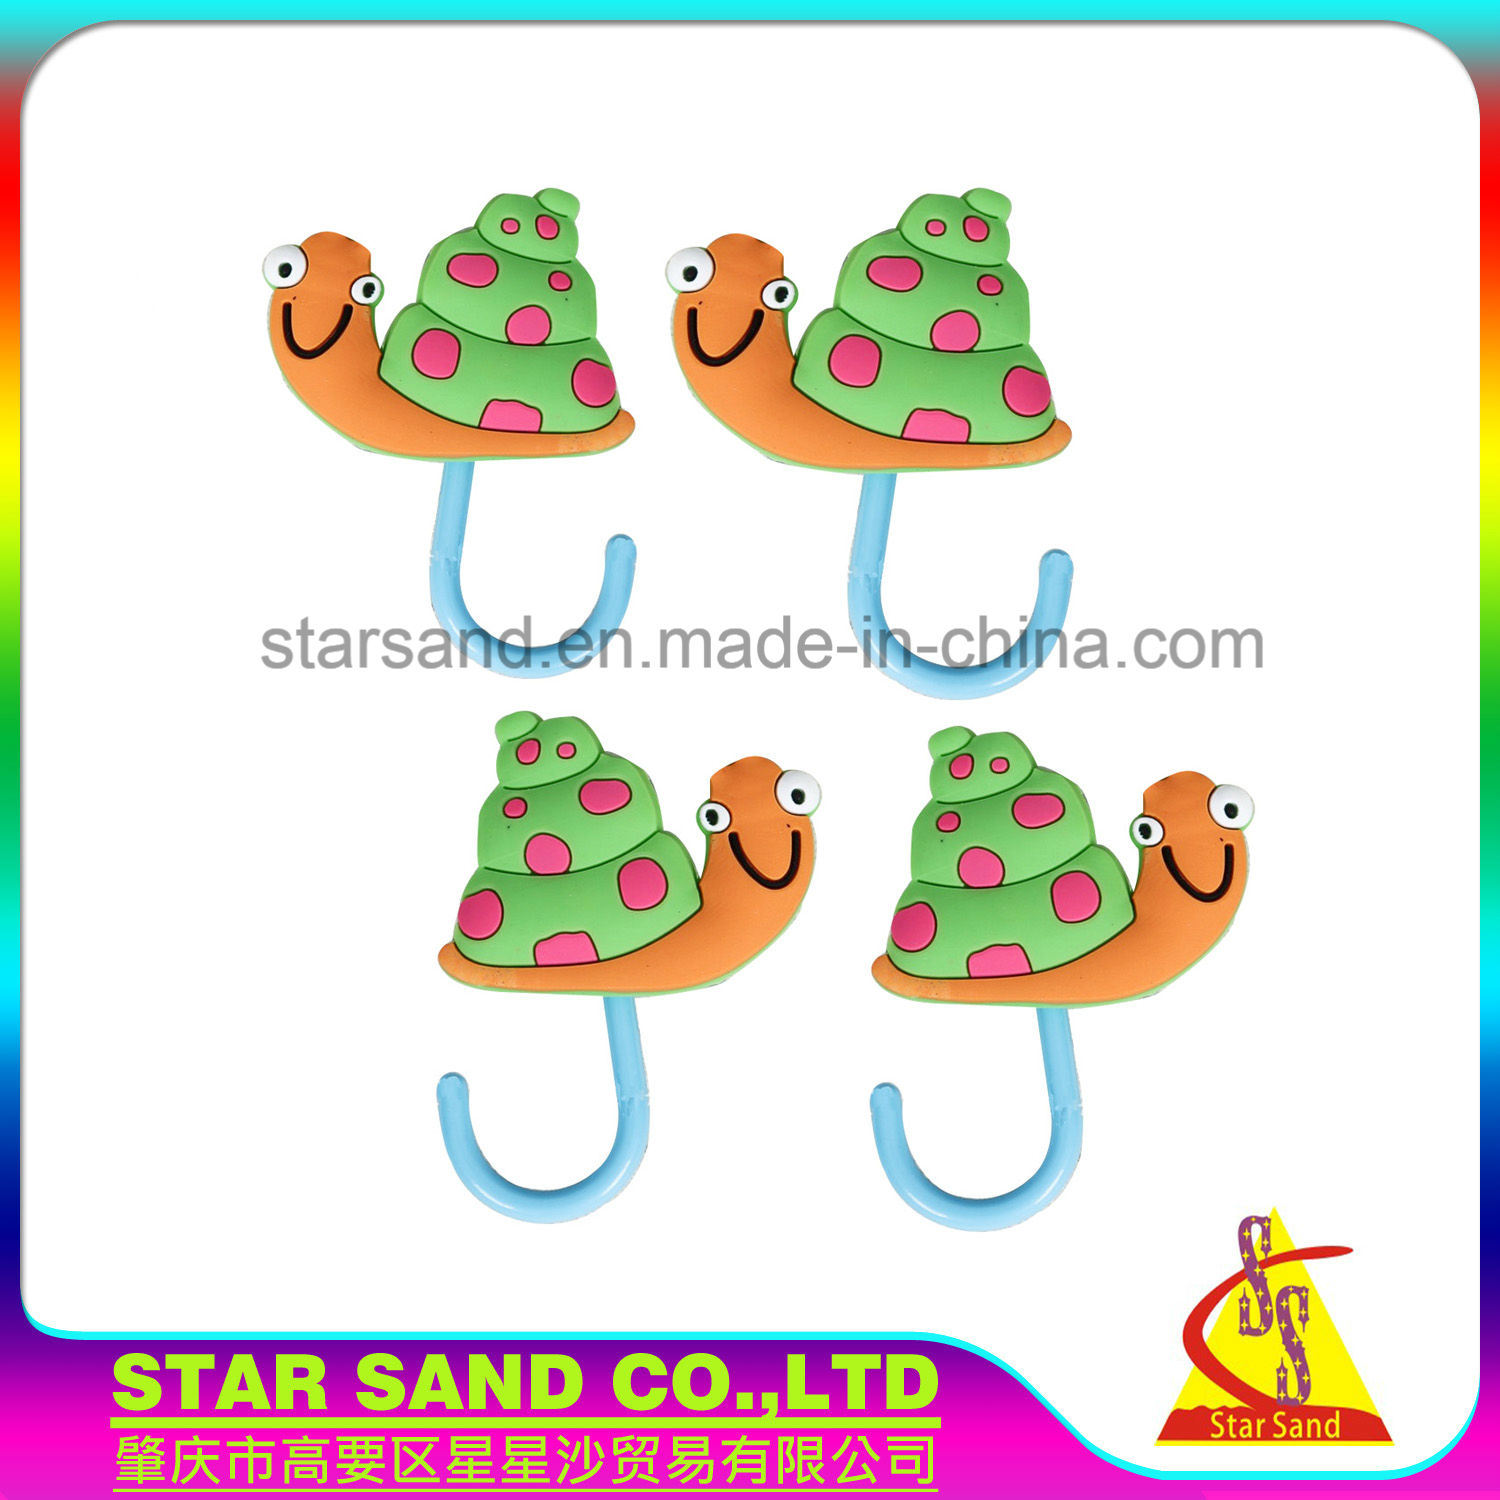 /proimages/2f0j00WNoaRlIhYzgy/oem-cutomized-door-clothes-hanger-cartoon-design-hooks-silicon-hanger.jpg